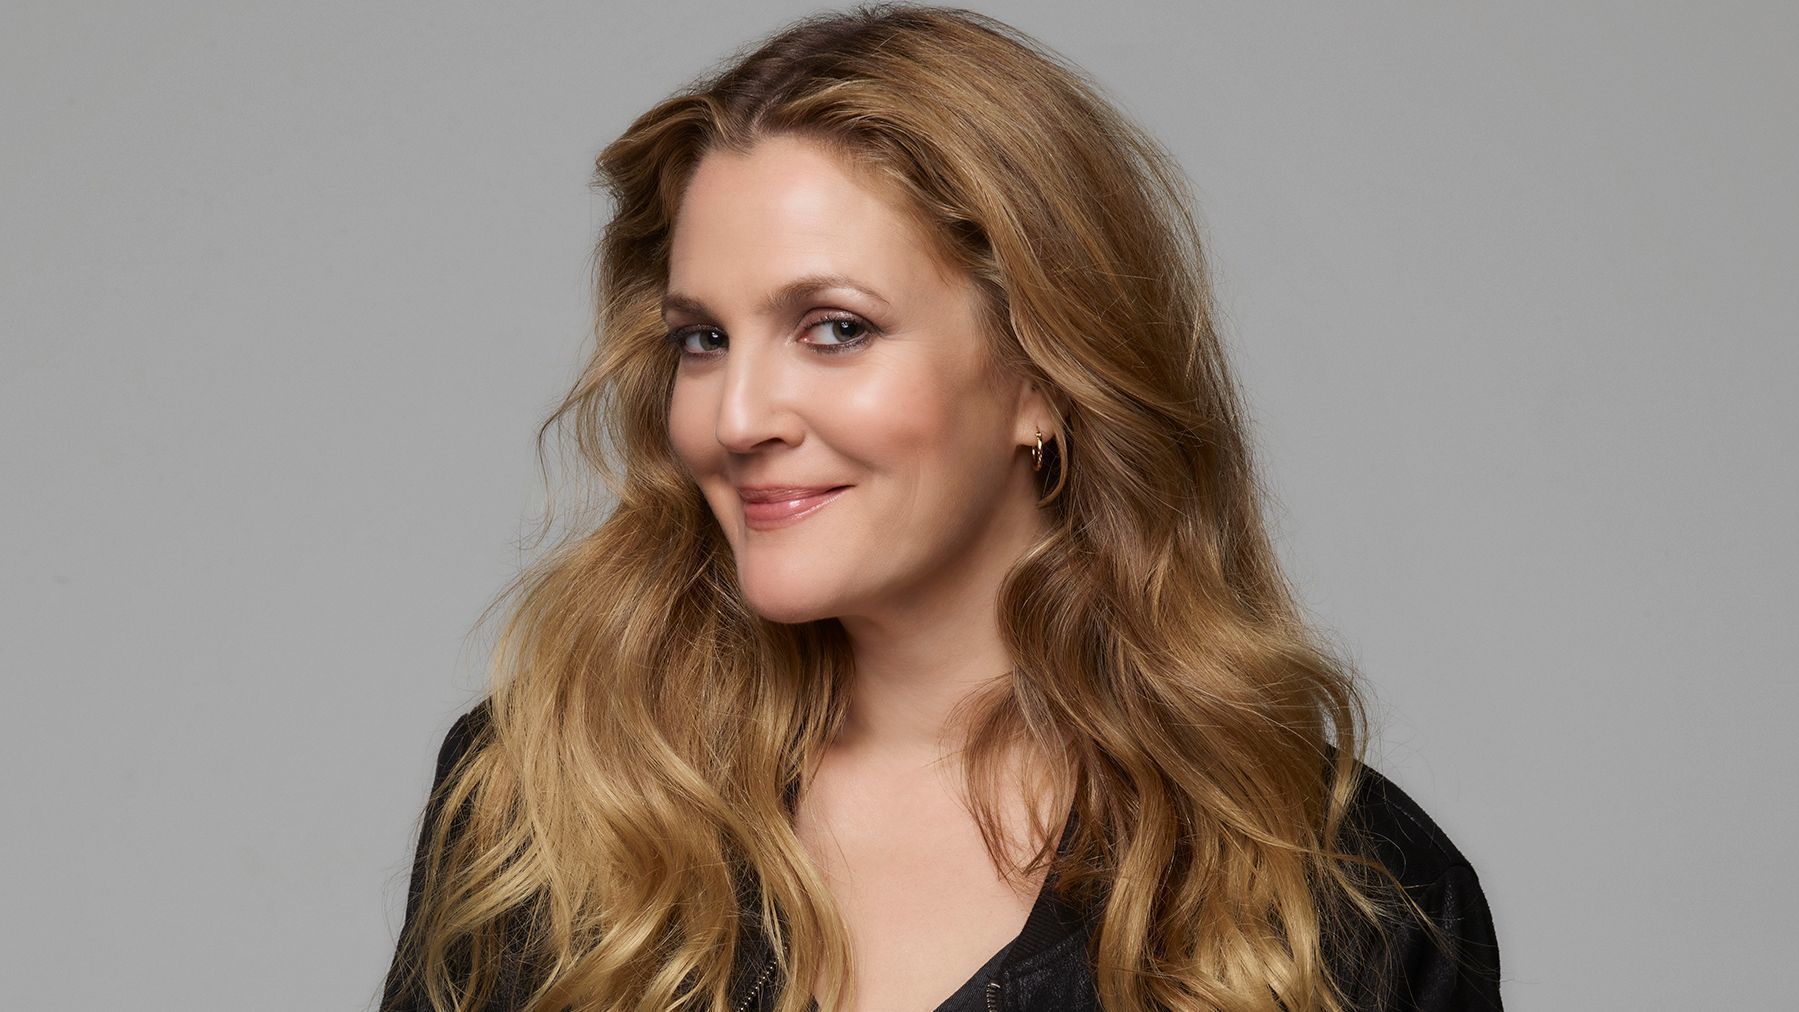 Drew Barrymore Arena Pile Top 10 Typecast Actresses In The World